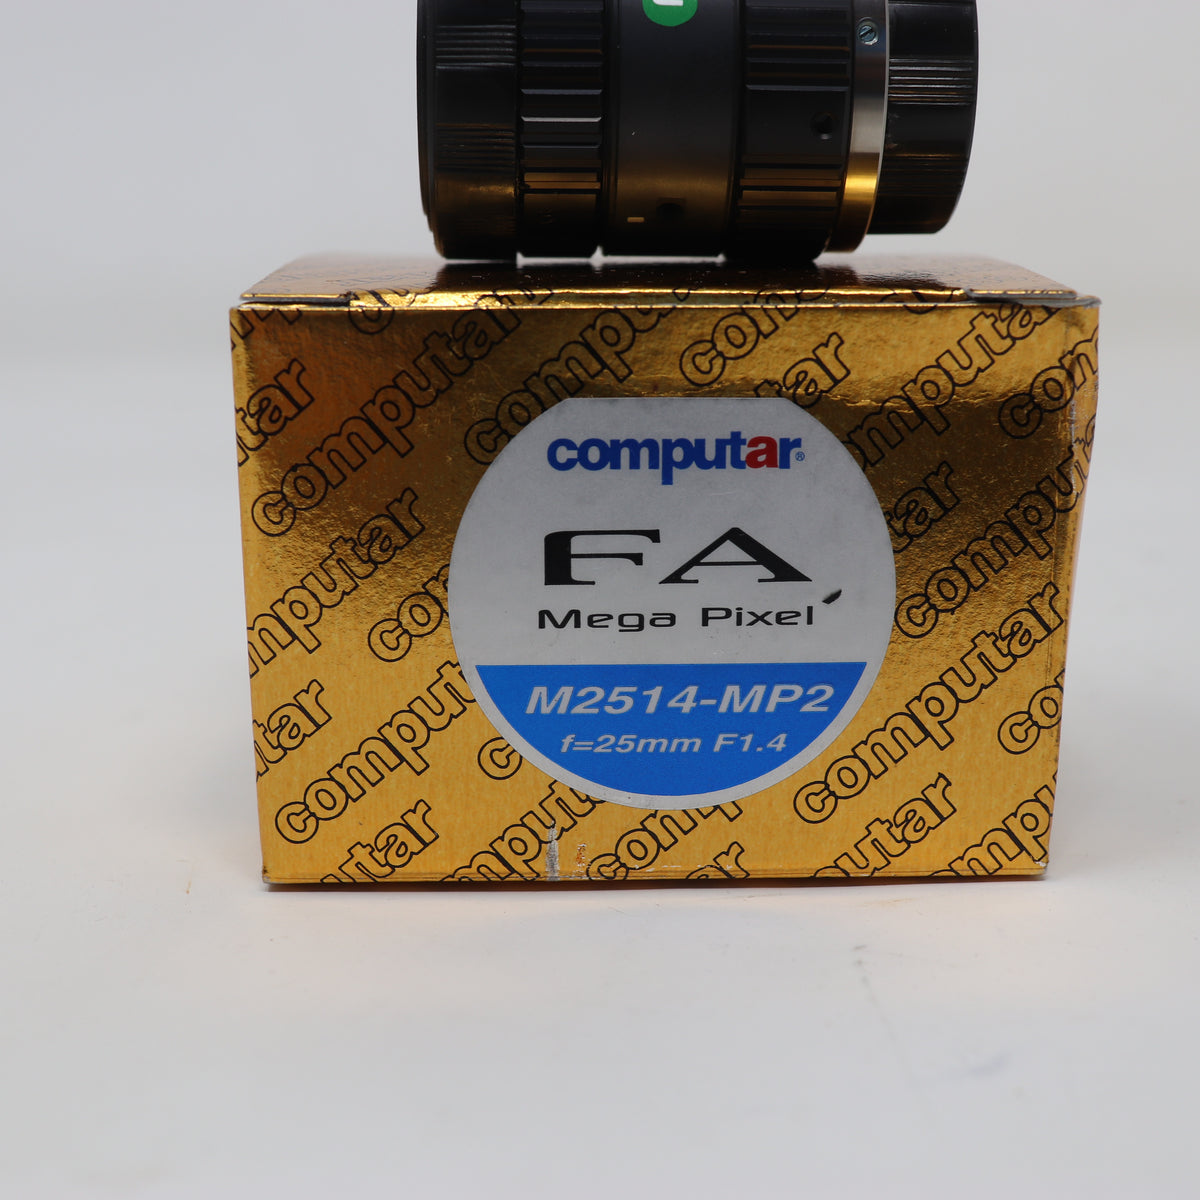 Computar C-Mount 25mm Fixed Focal Lens M2514-MP2